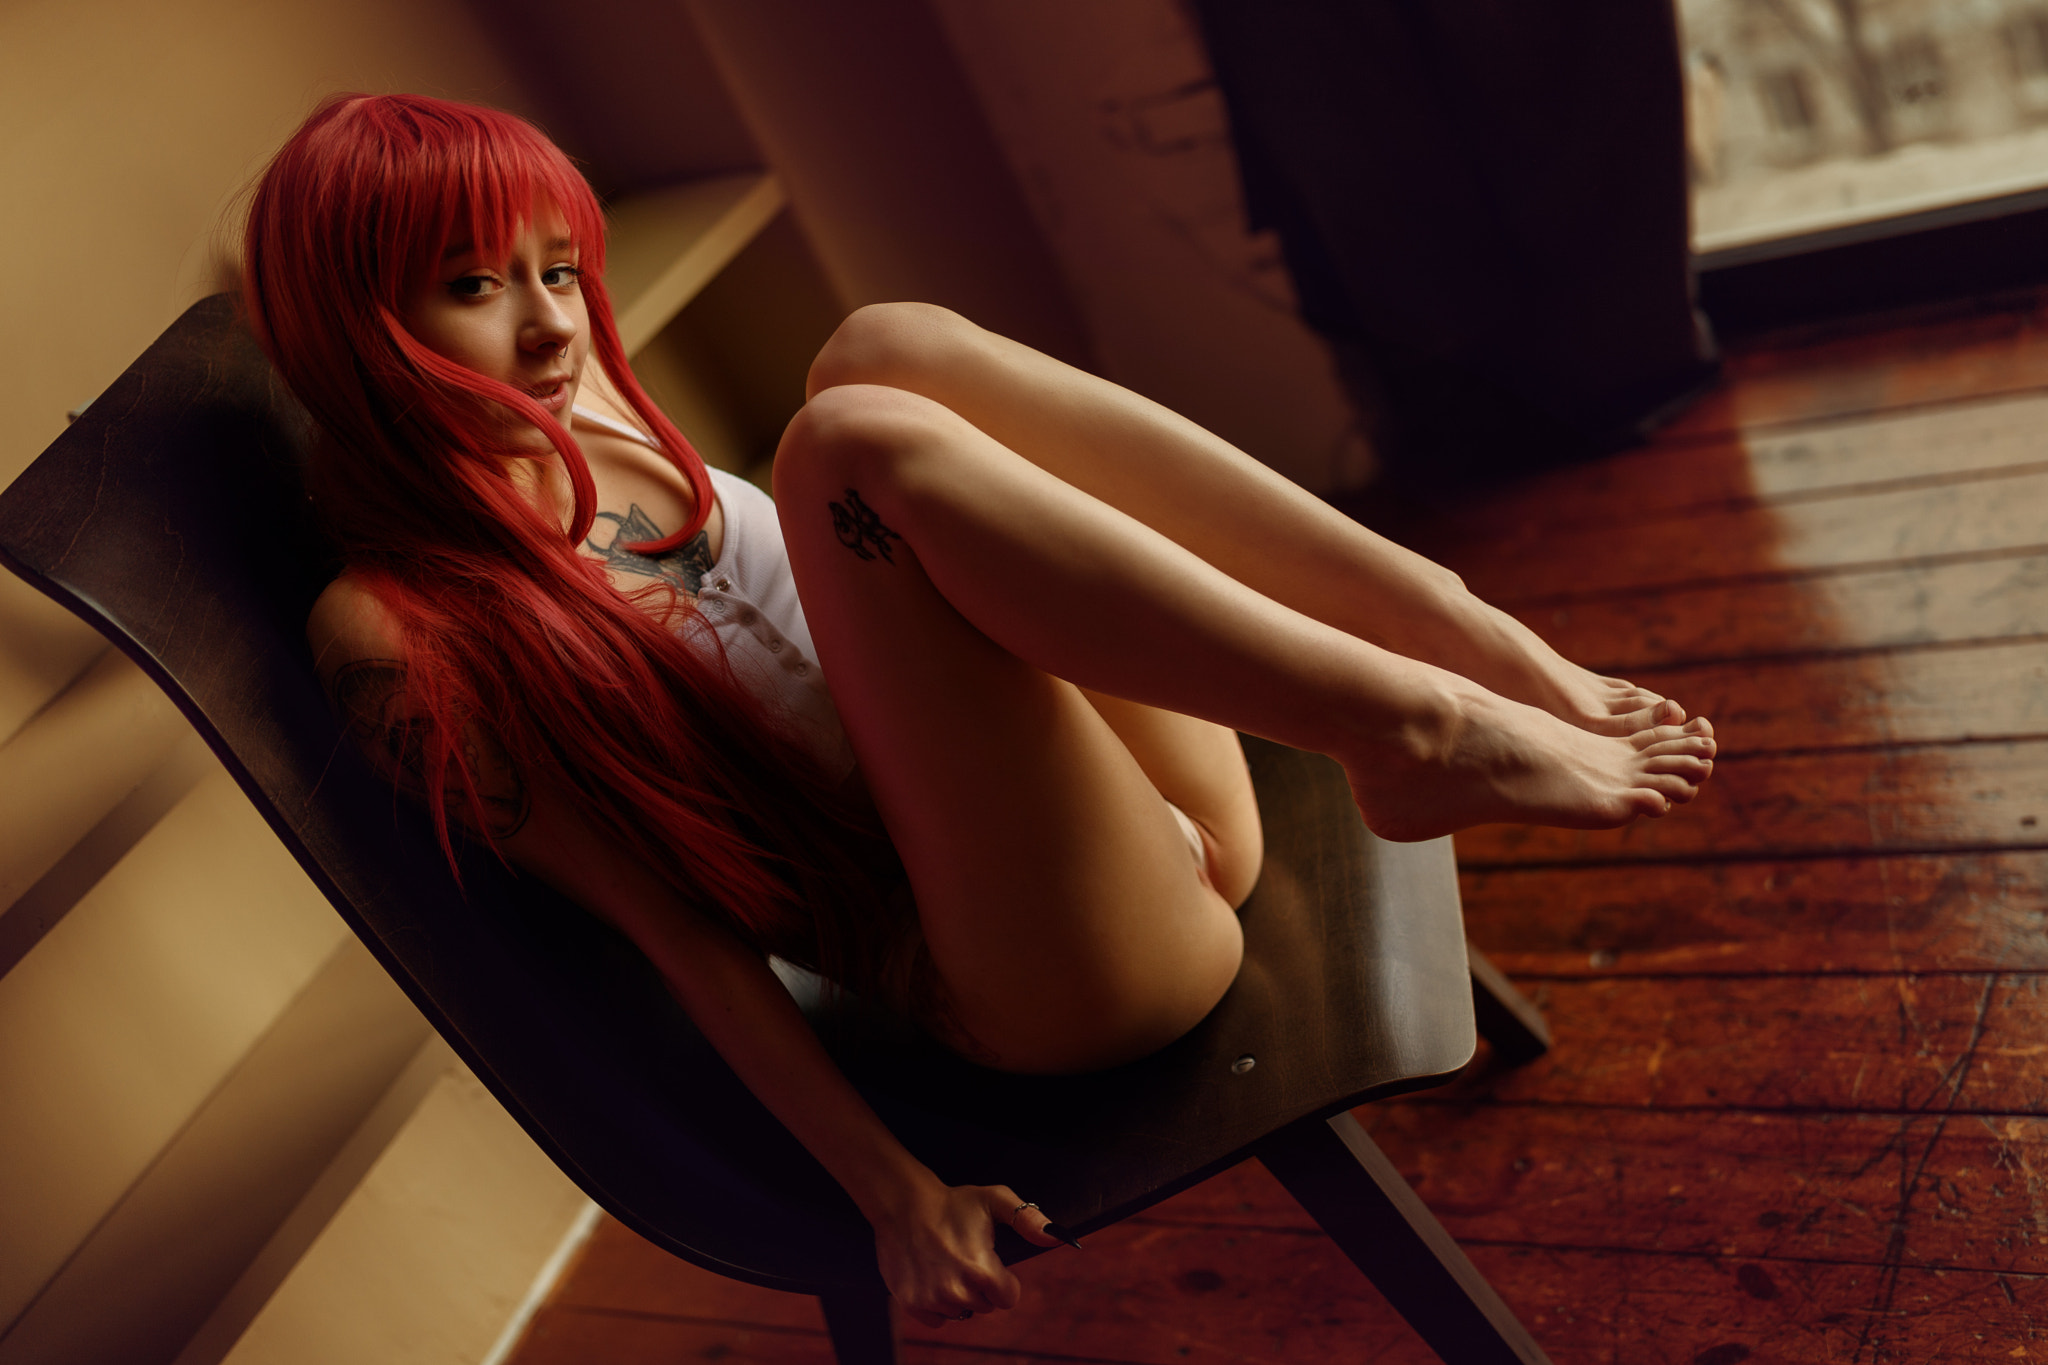 People 2048x1365 women redhead women indoors tattoo skinny panties ass chair floor nose ring shelves window pointed toes